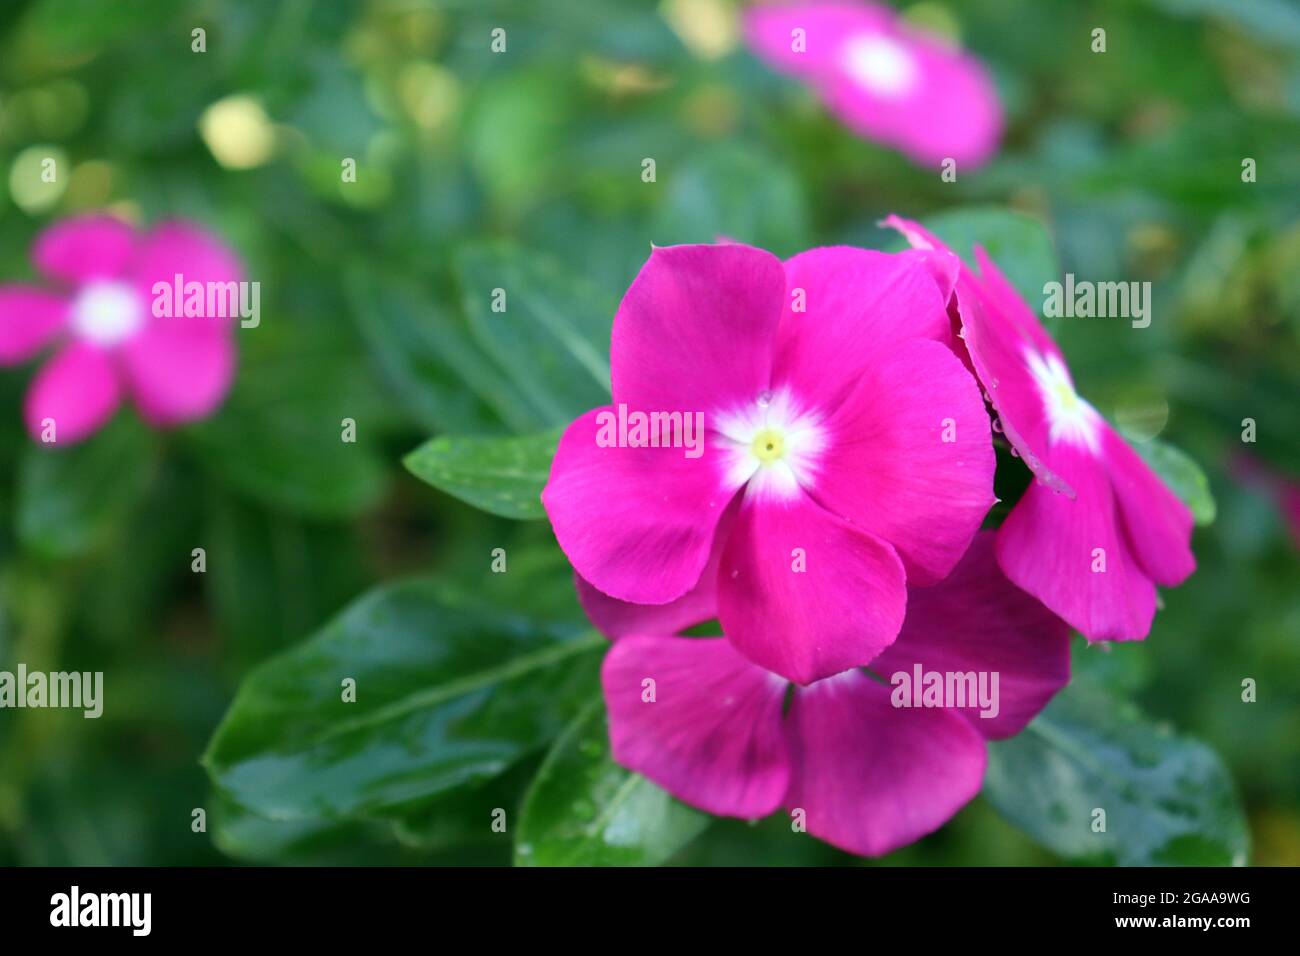 two pink color flowers together Stock Photo